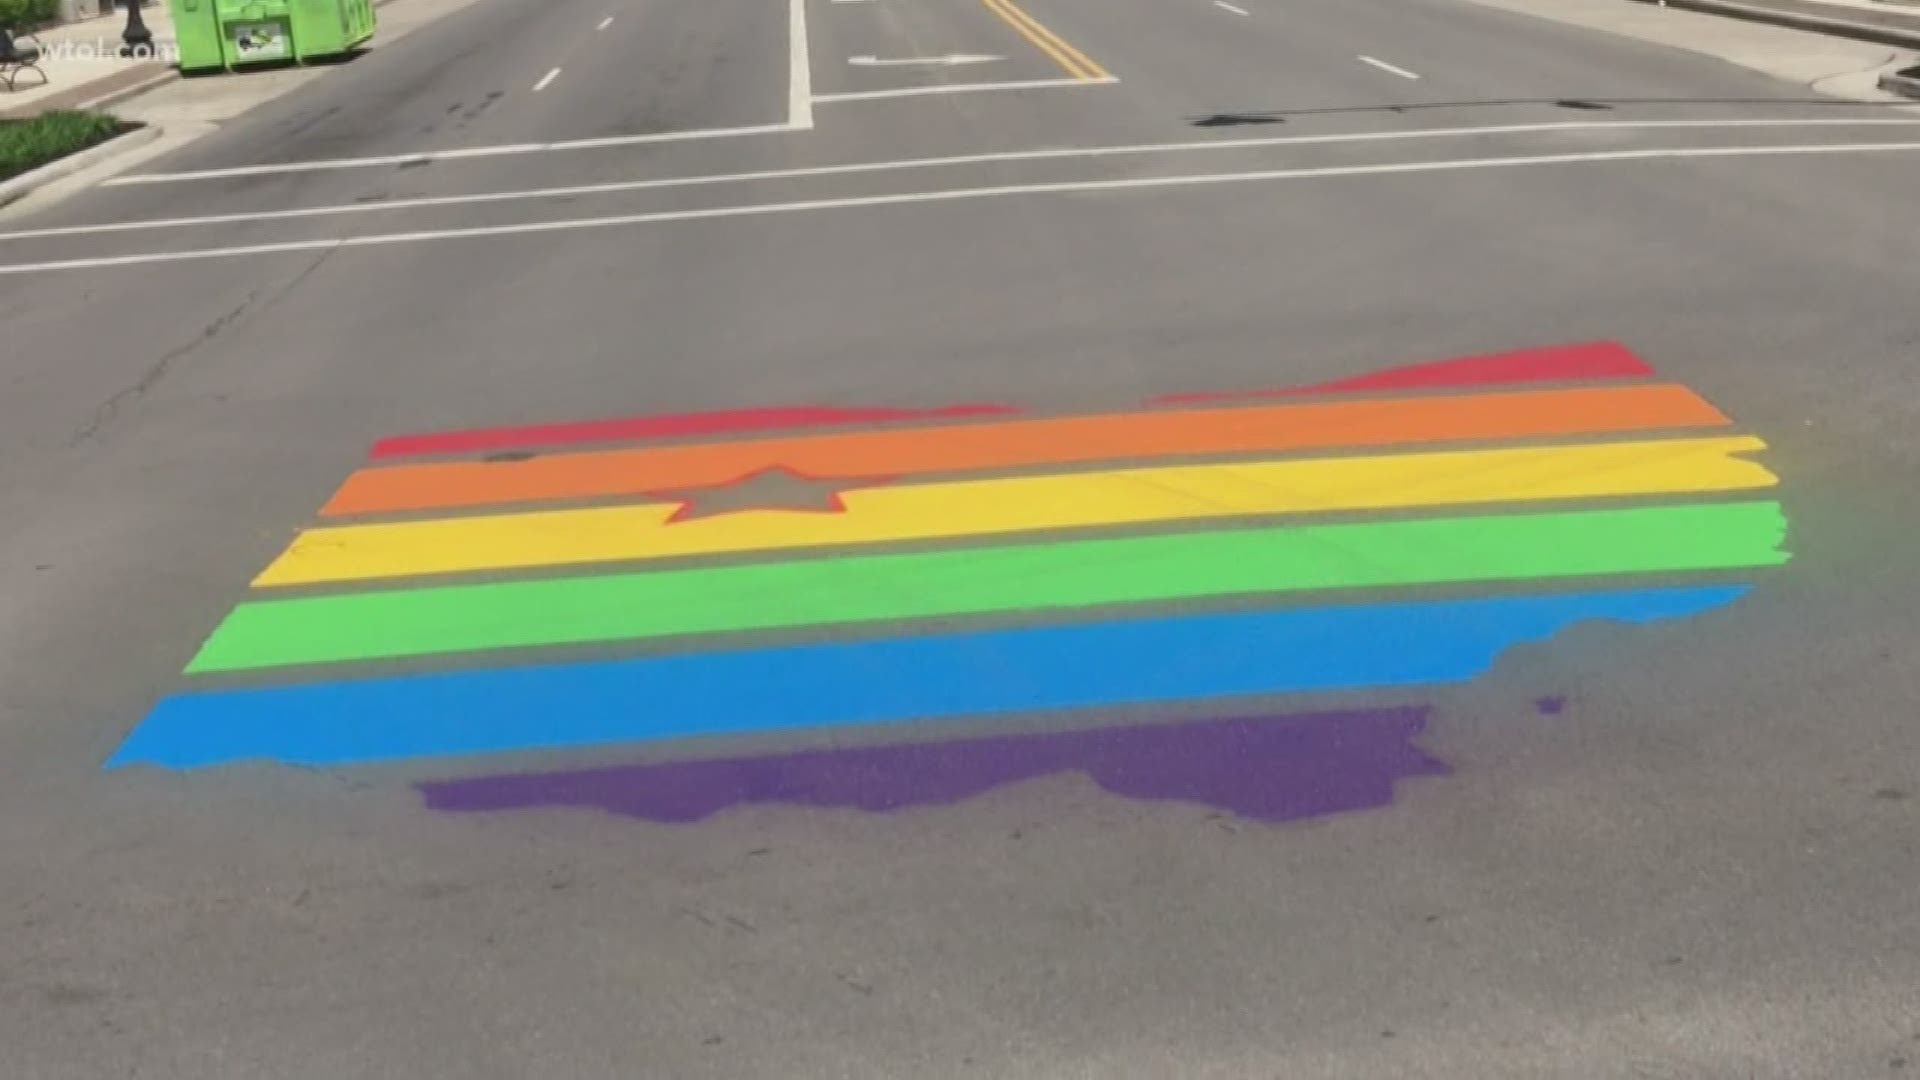 The group is using art in three locations in the city to promote the pride event next Saturday.